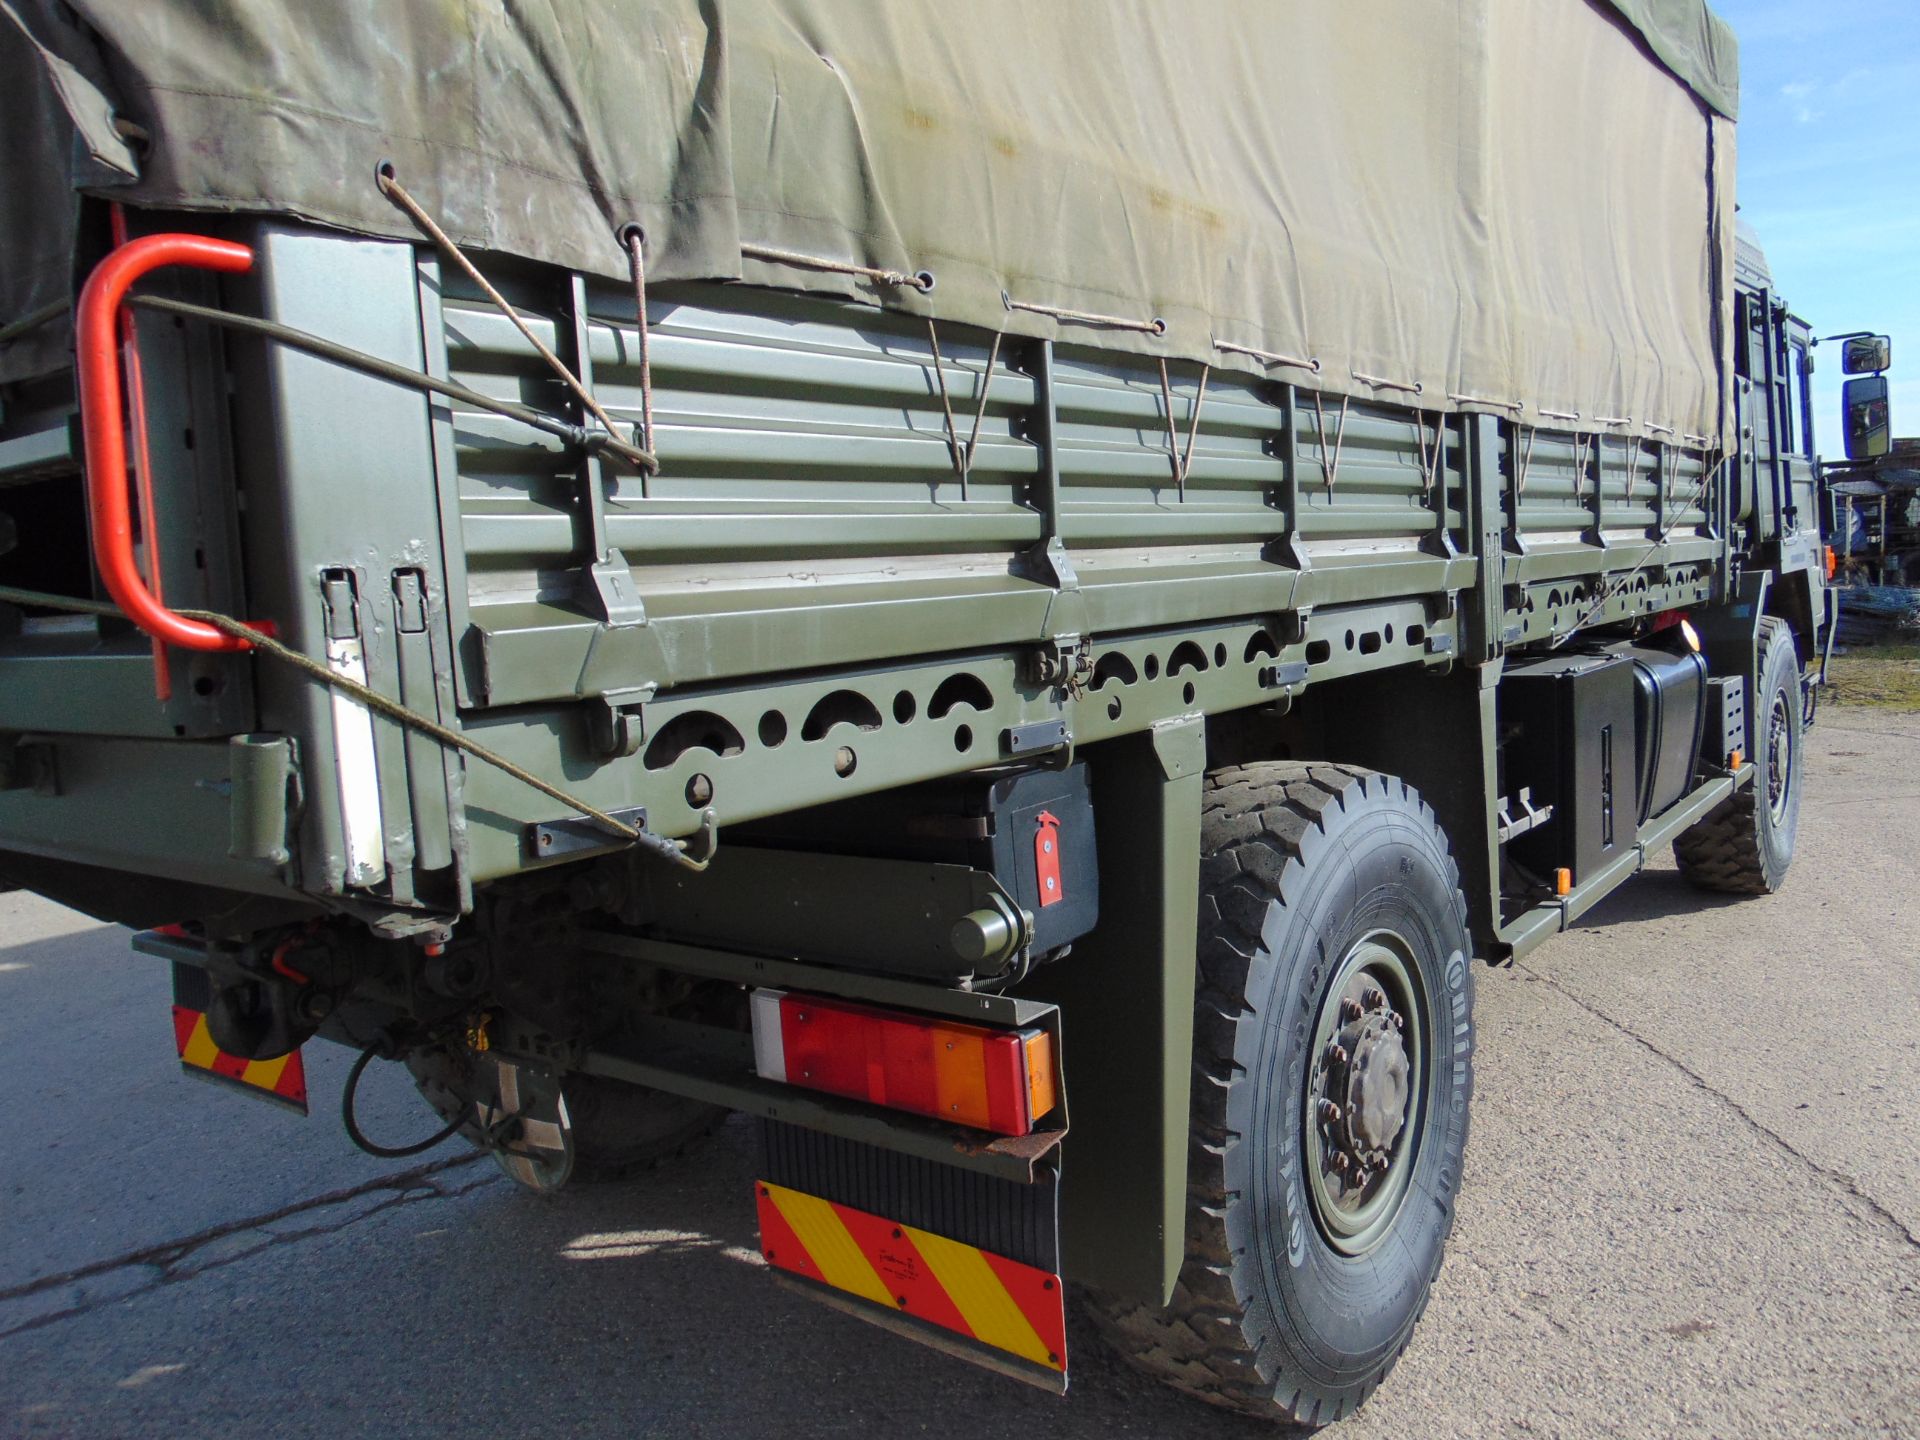 MAN 4X4 HX60 18.330 FLAT BED CARGO TRUCK ONLY 62,493 km! - Image 8 of 27